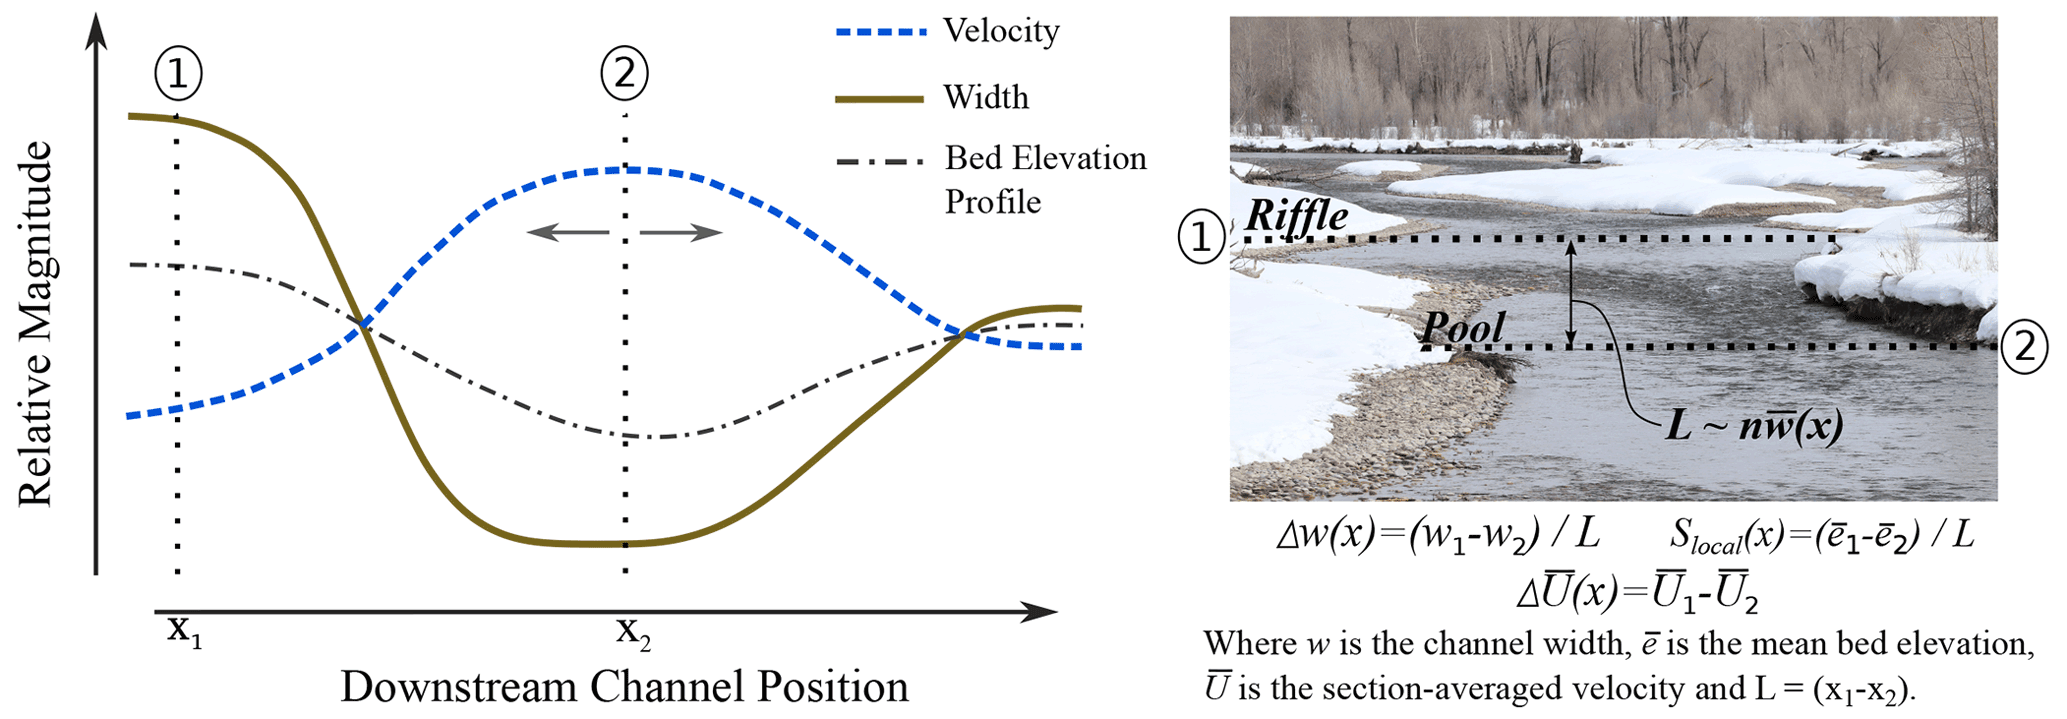 Harvesting situation on flat terrain (site A) and steep slope